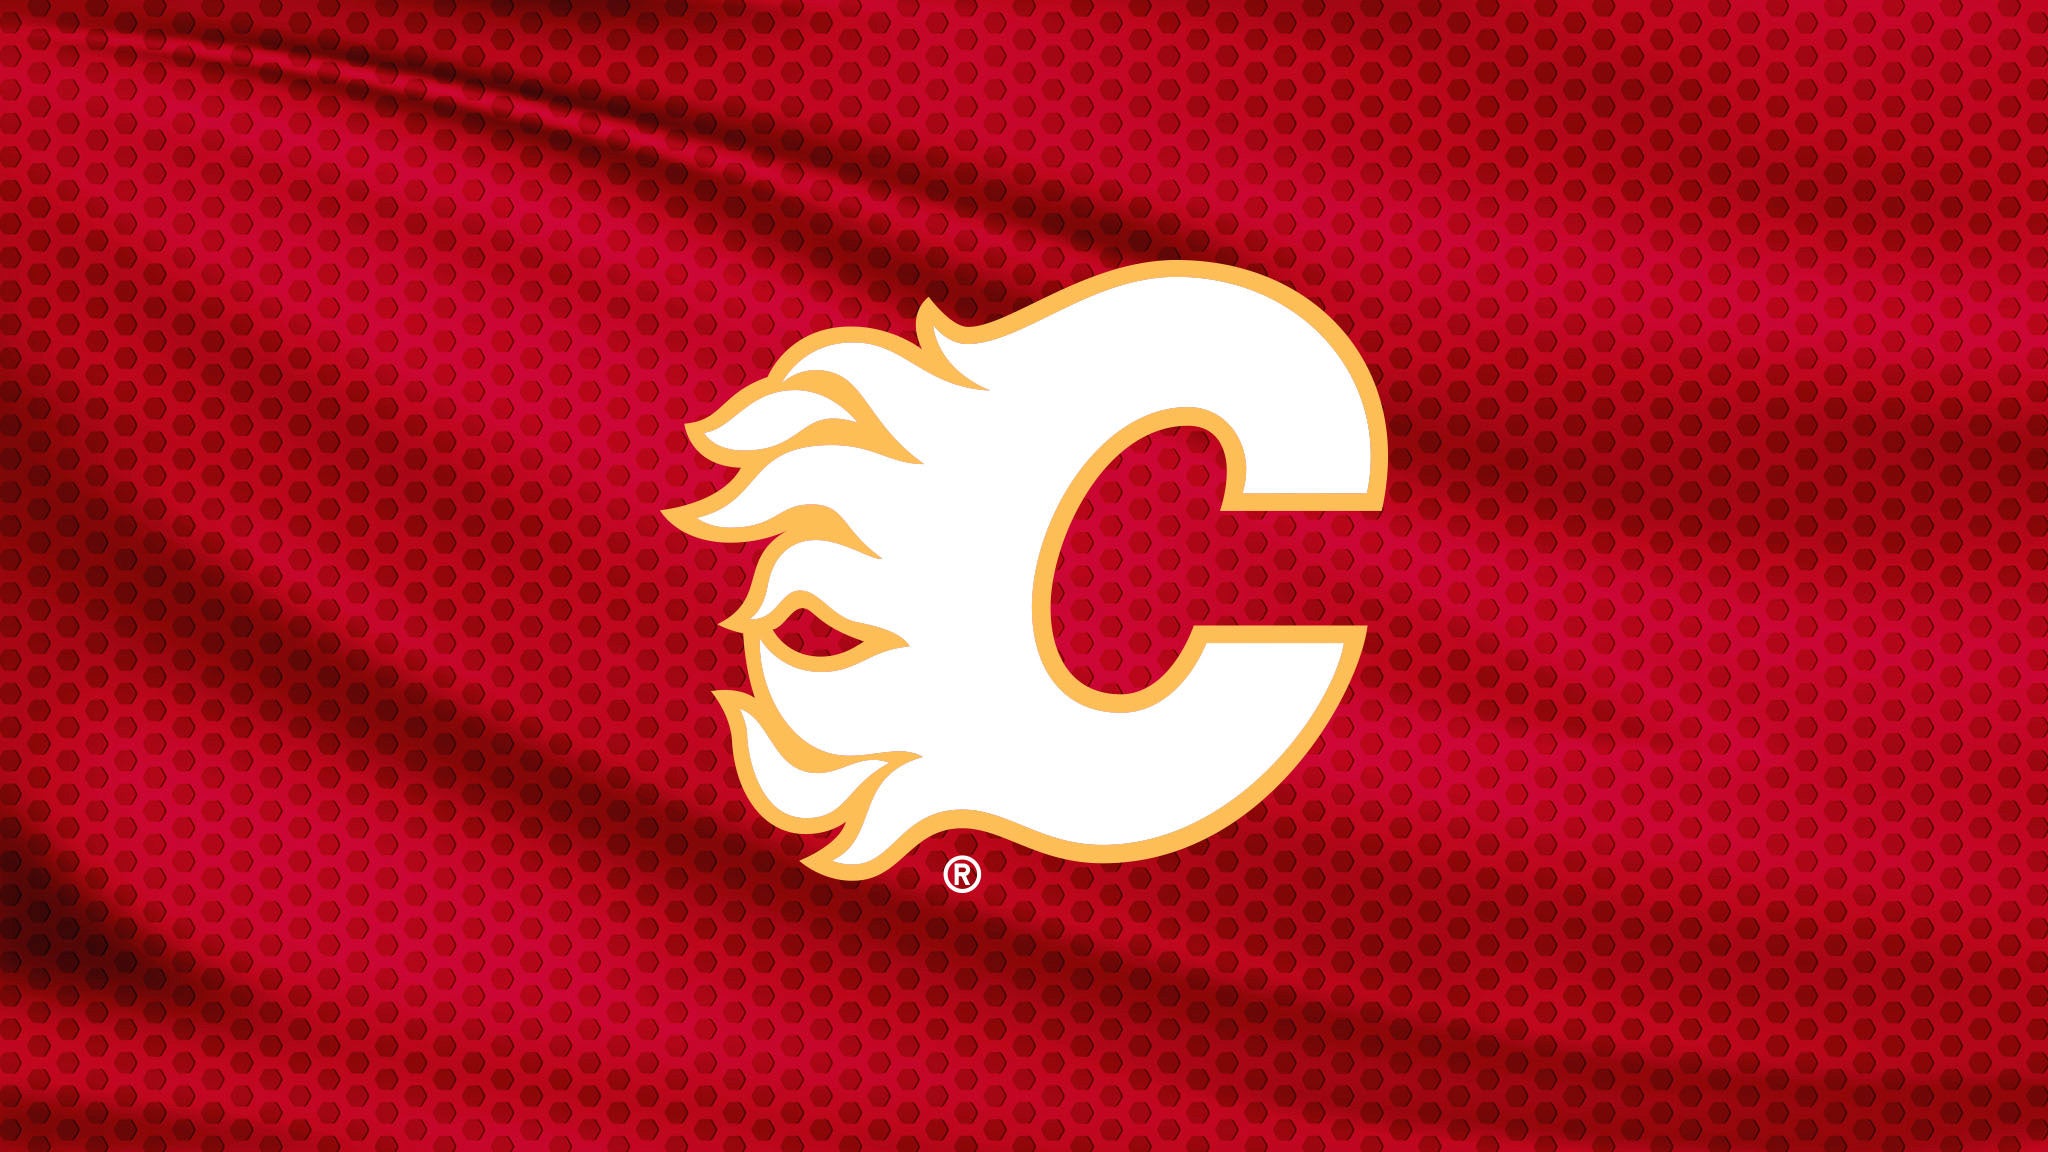 Calgary Flames vs. Columbus Blue Jackets in Calgary promo photo for Ticketmaster presale offer code